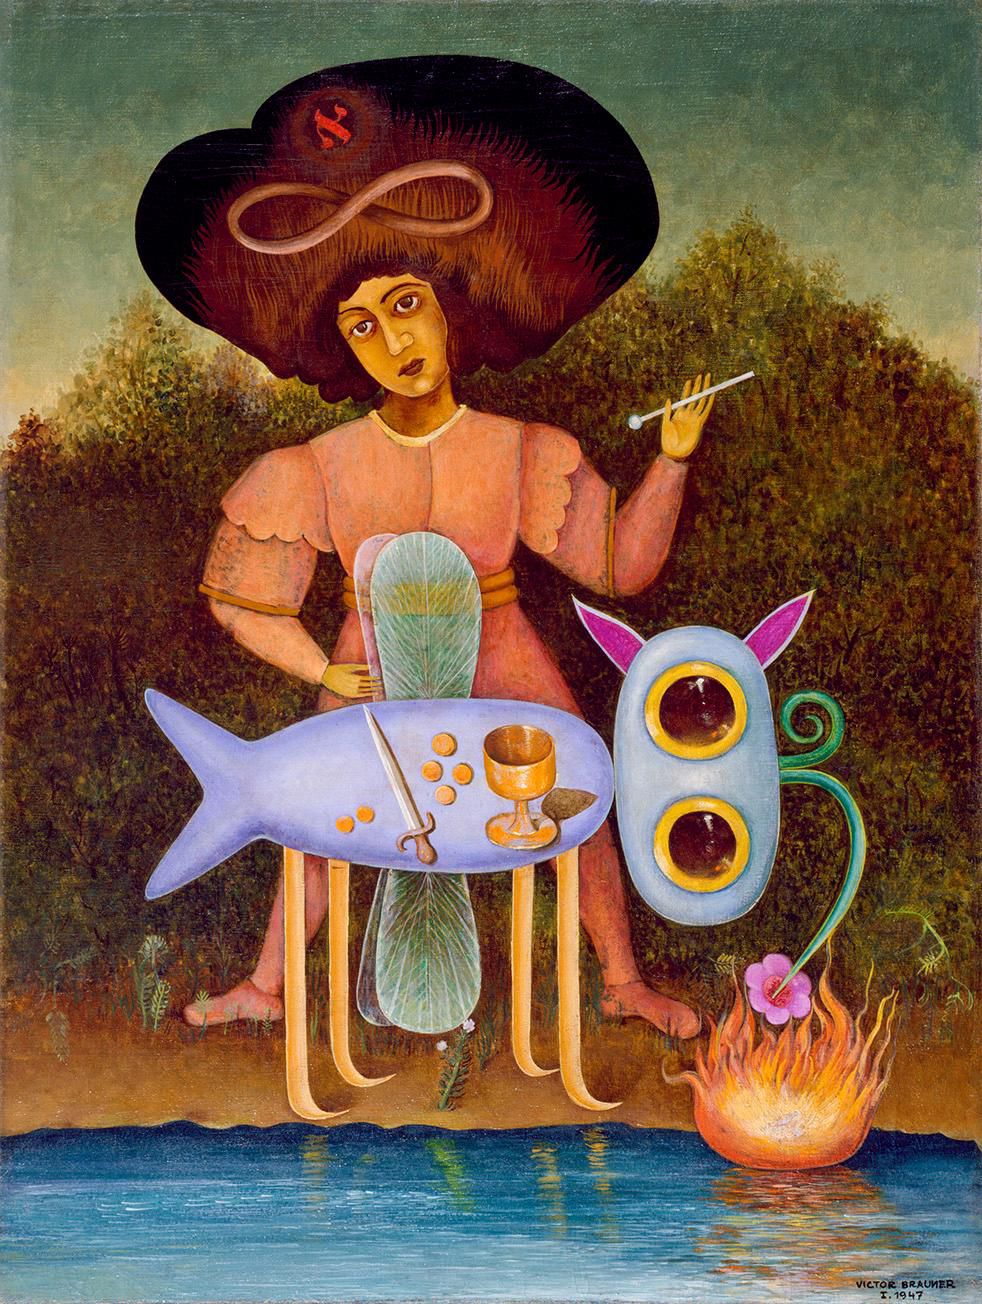 The Victor Brauner who makes the poster.